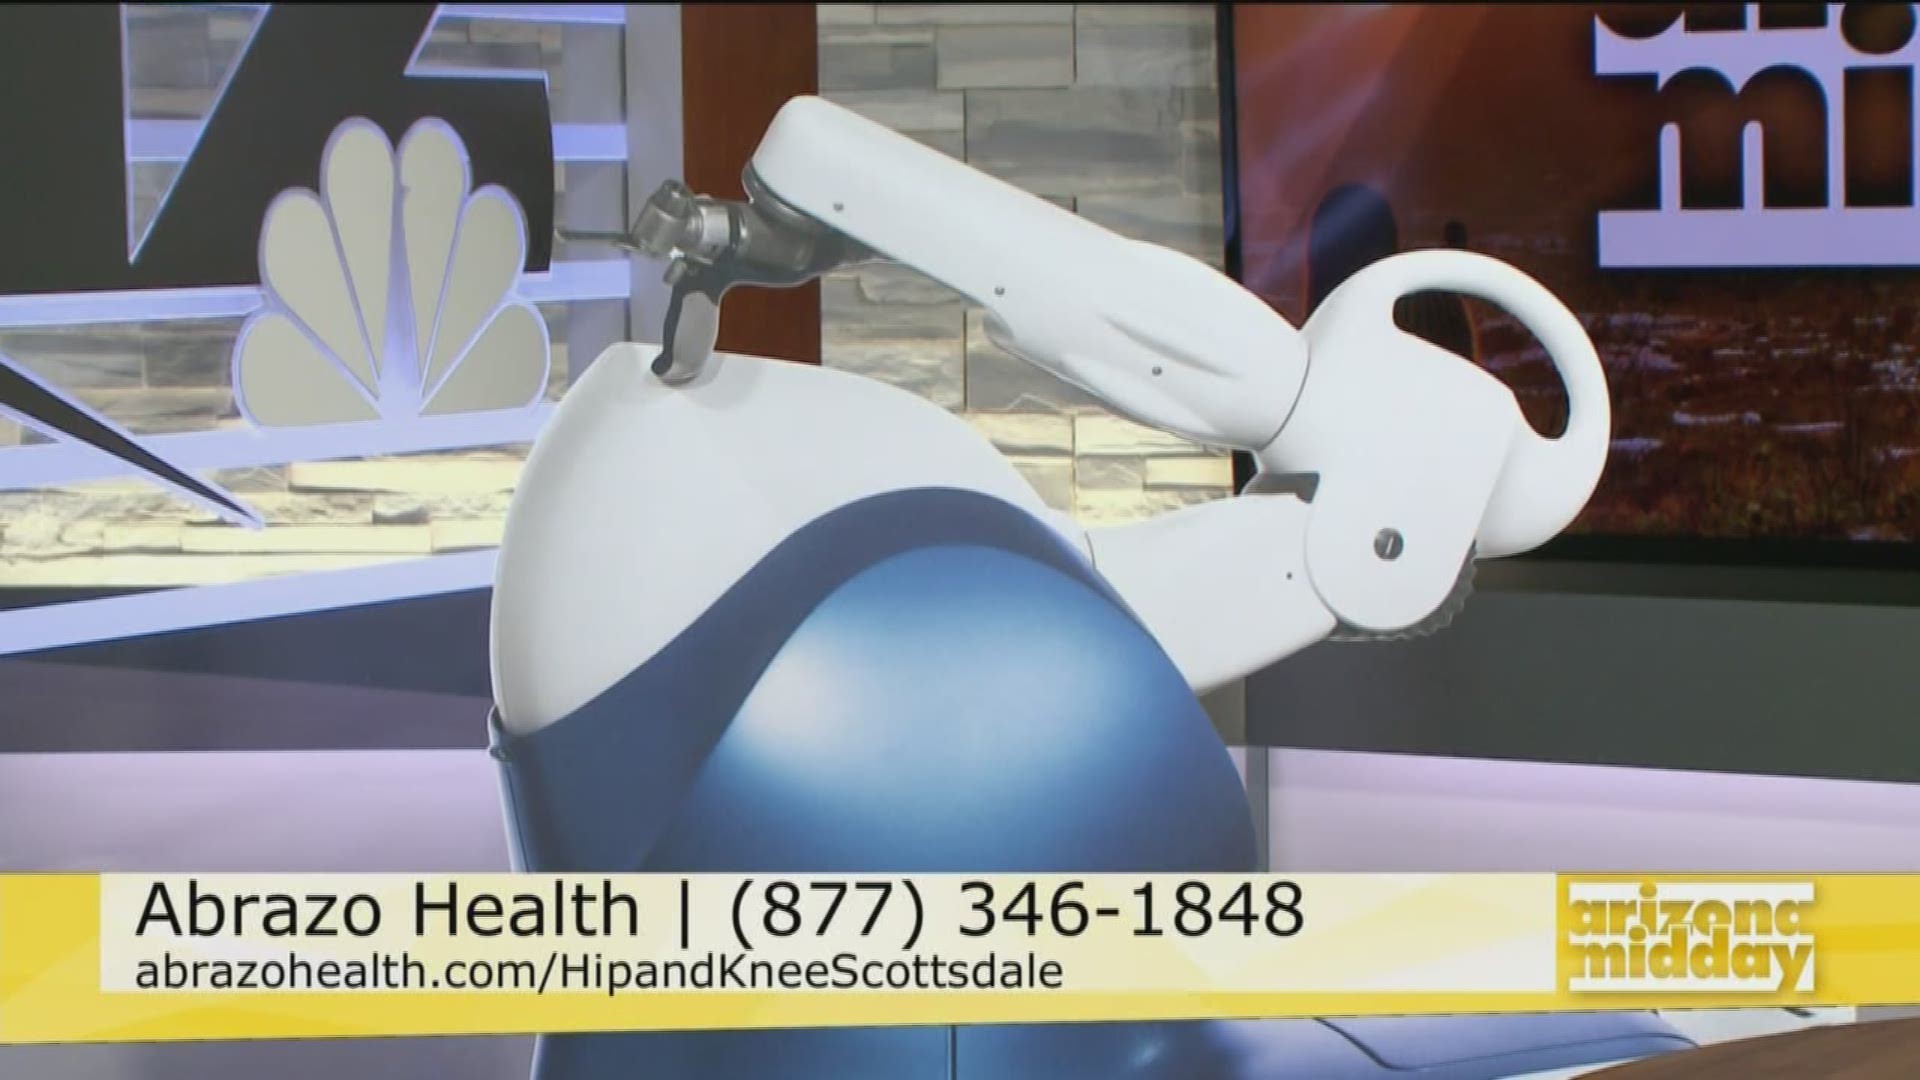 Dr. Russell Cohen with Abrazo Health tells us about the latest technology that can help you with your Knee and Hip pain